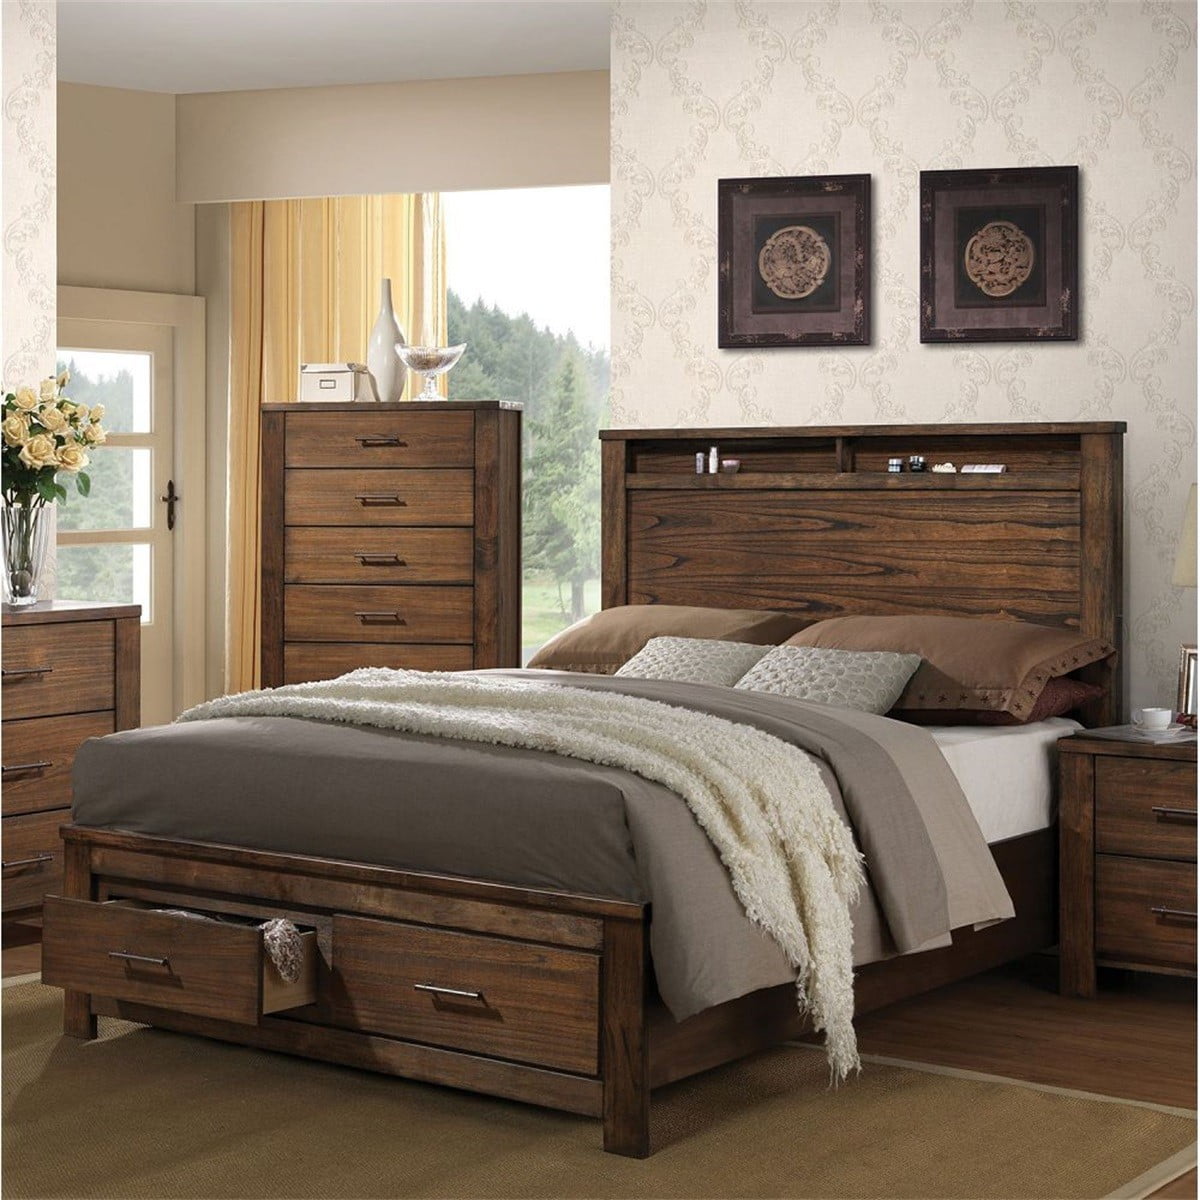 Modernluxe Queen Size Storage Platform Bed With 2 Storage Drawers And